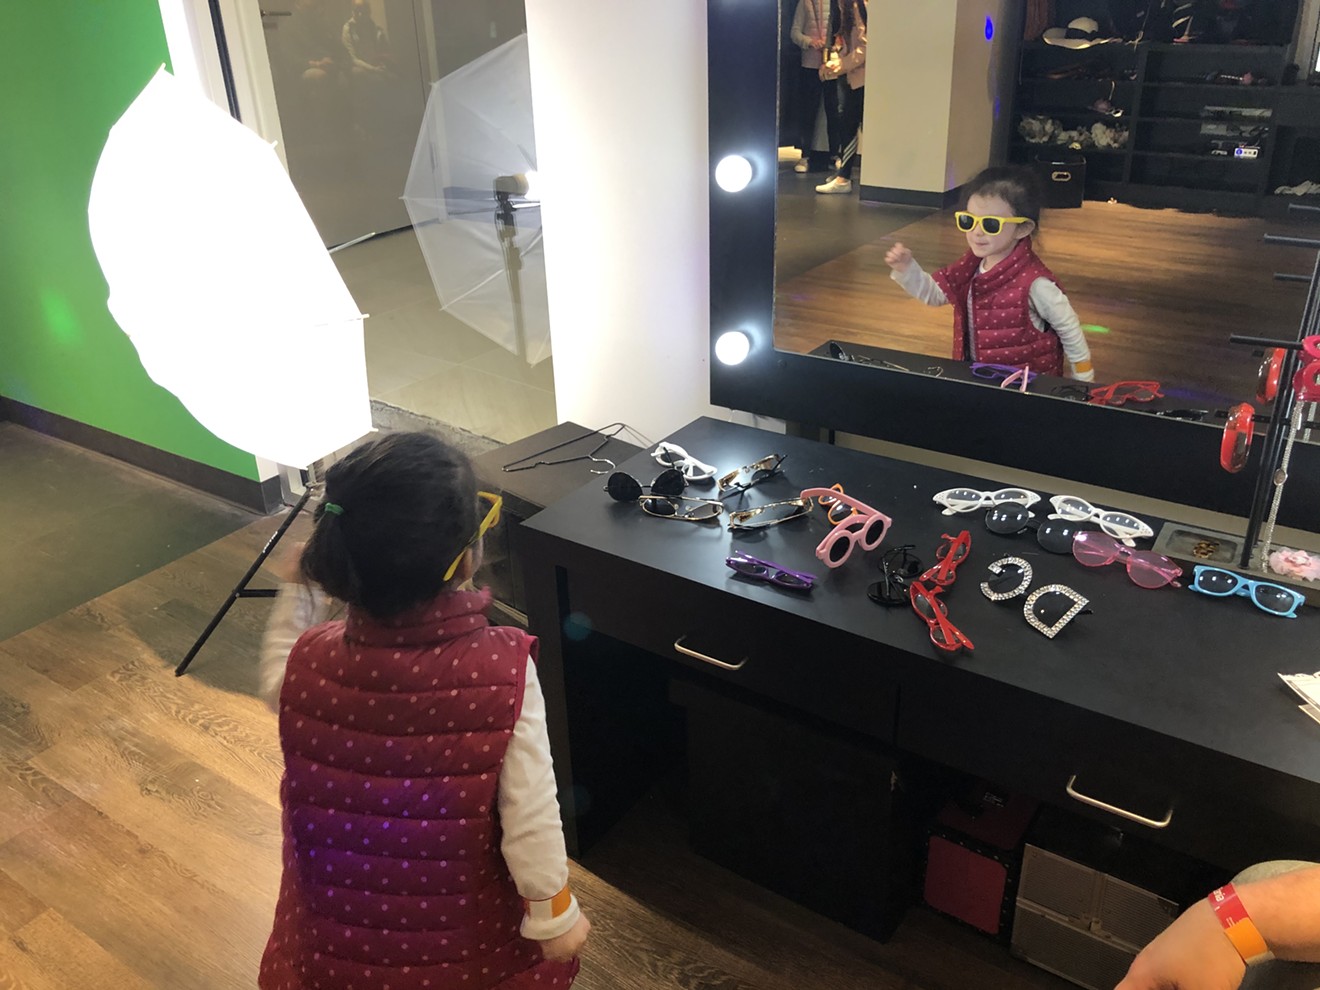 Emersyn Gallagher tries out some poses for her fashion show debut at KidZania, a new interactive, edutainment complex for kids in Frisco's Stonebriar Centre.